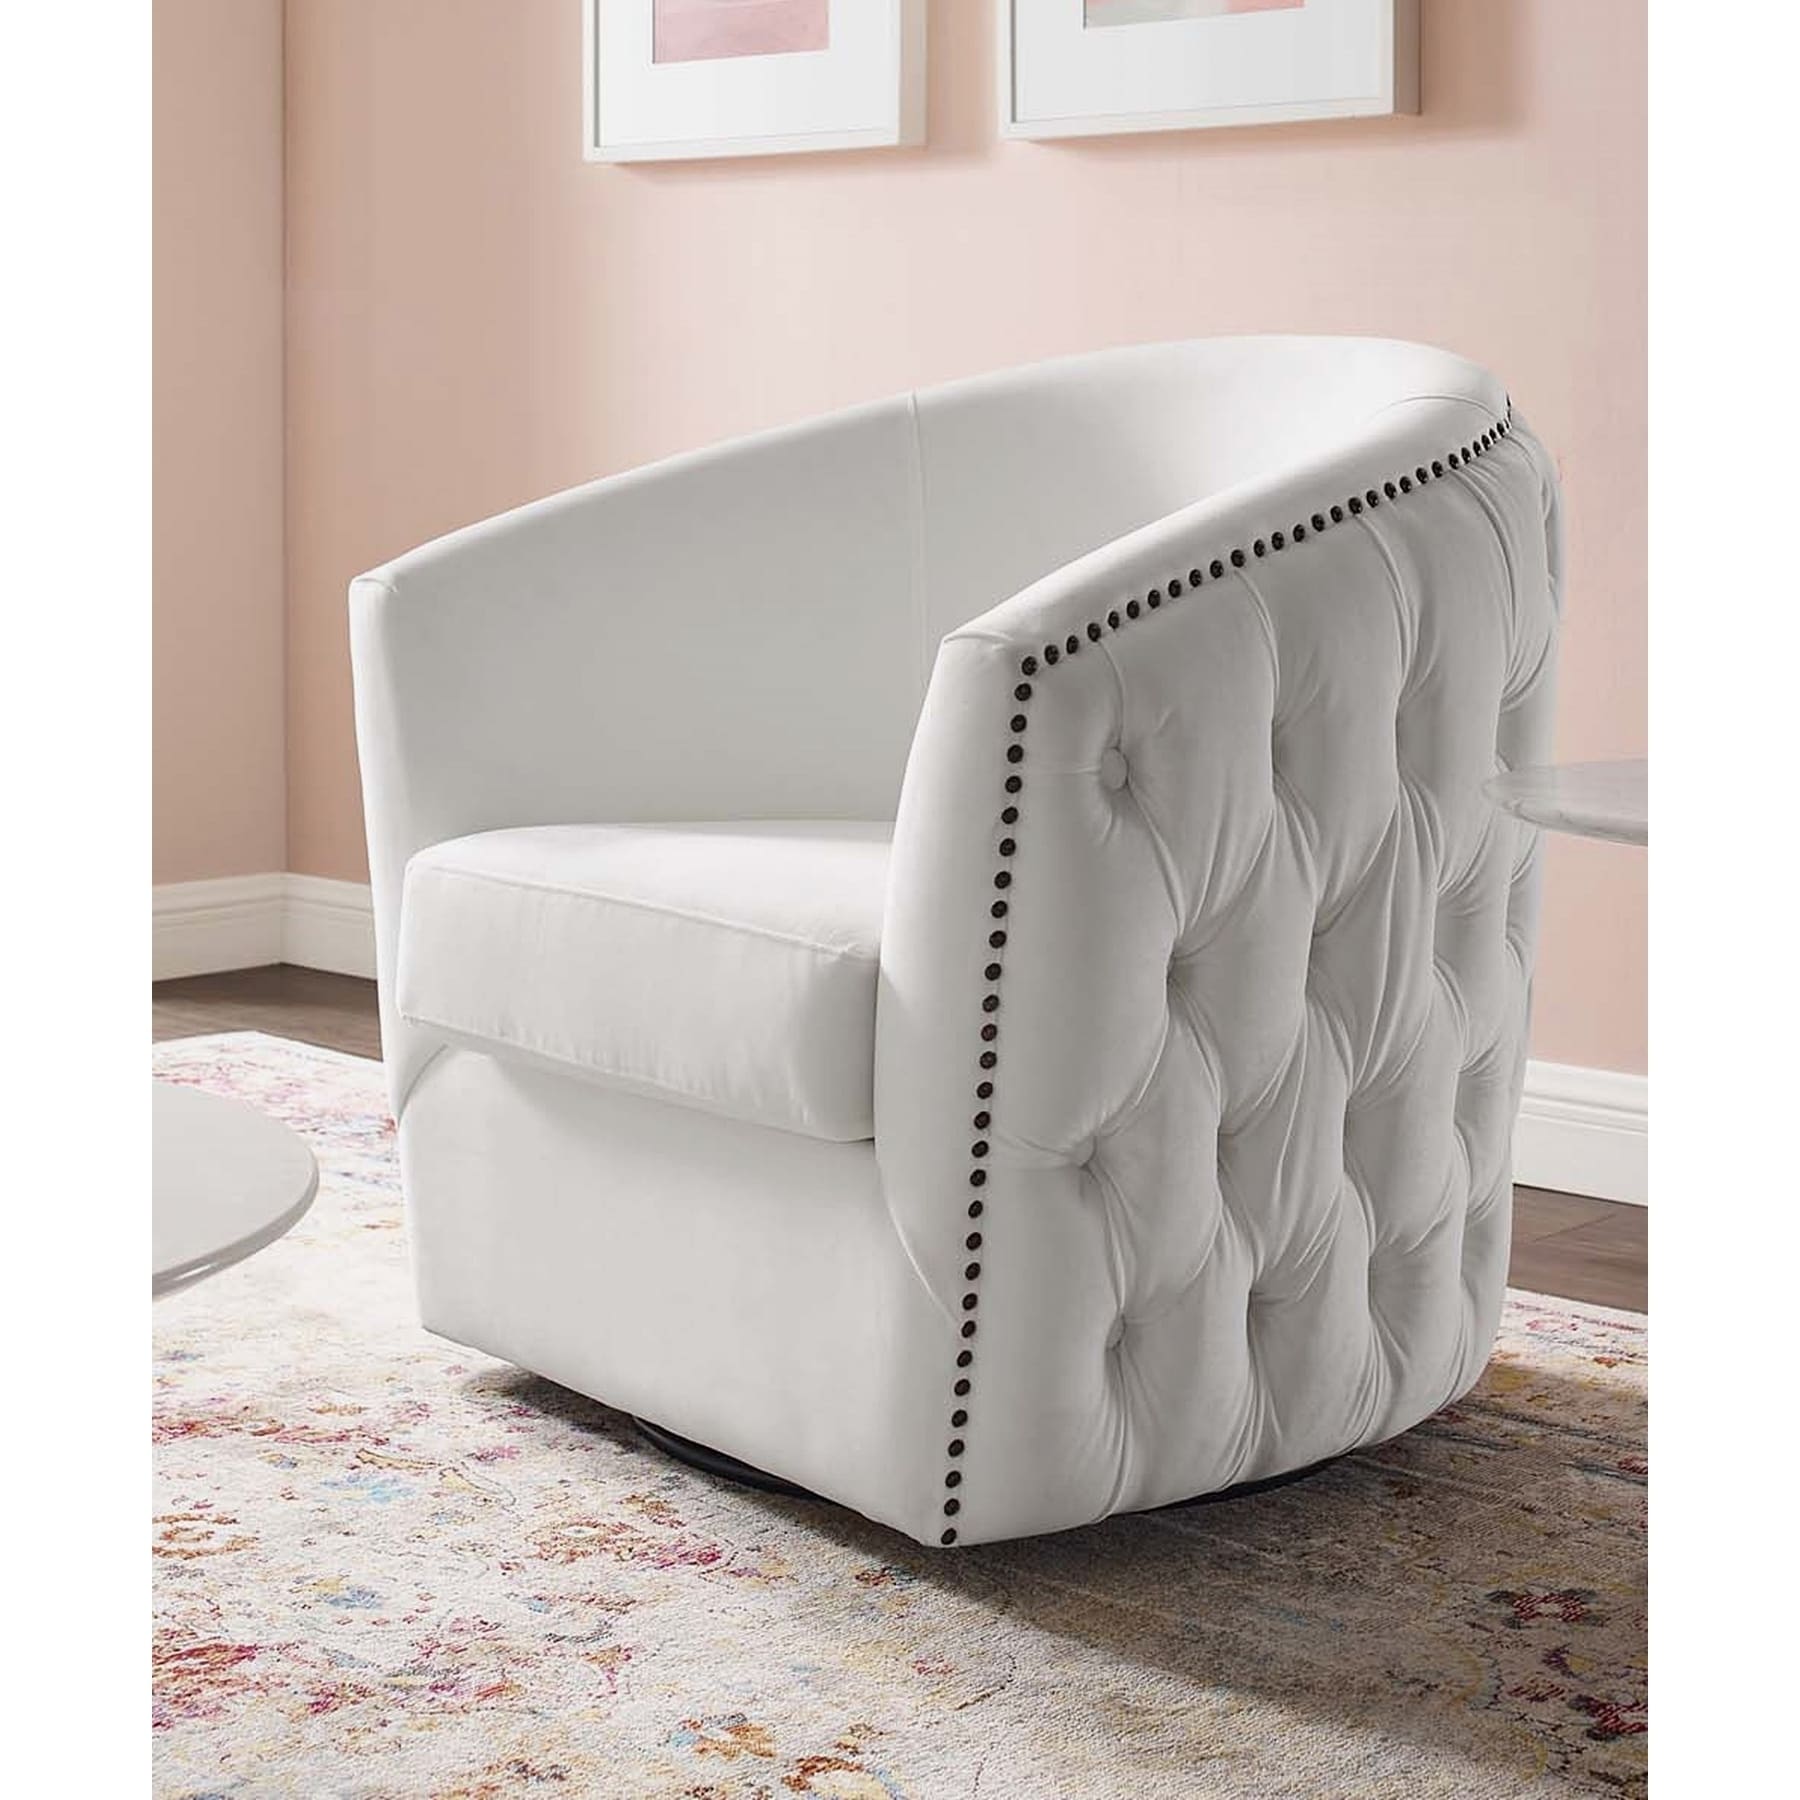 white tufted chair on caster legs